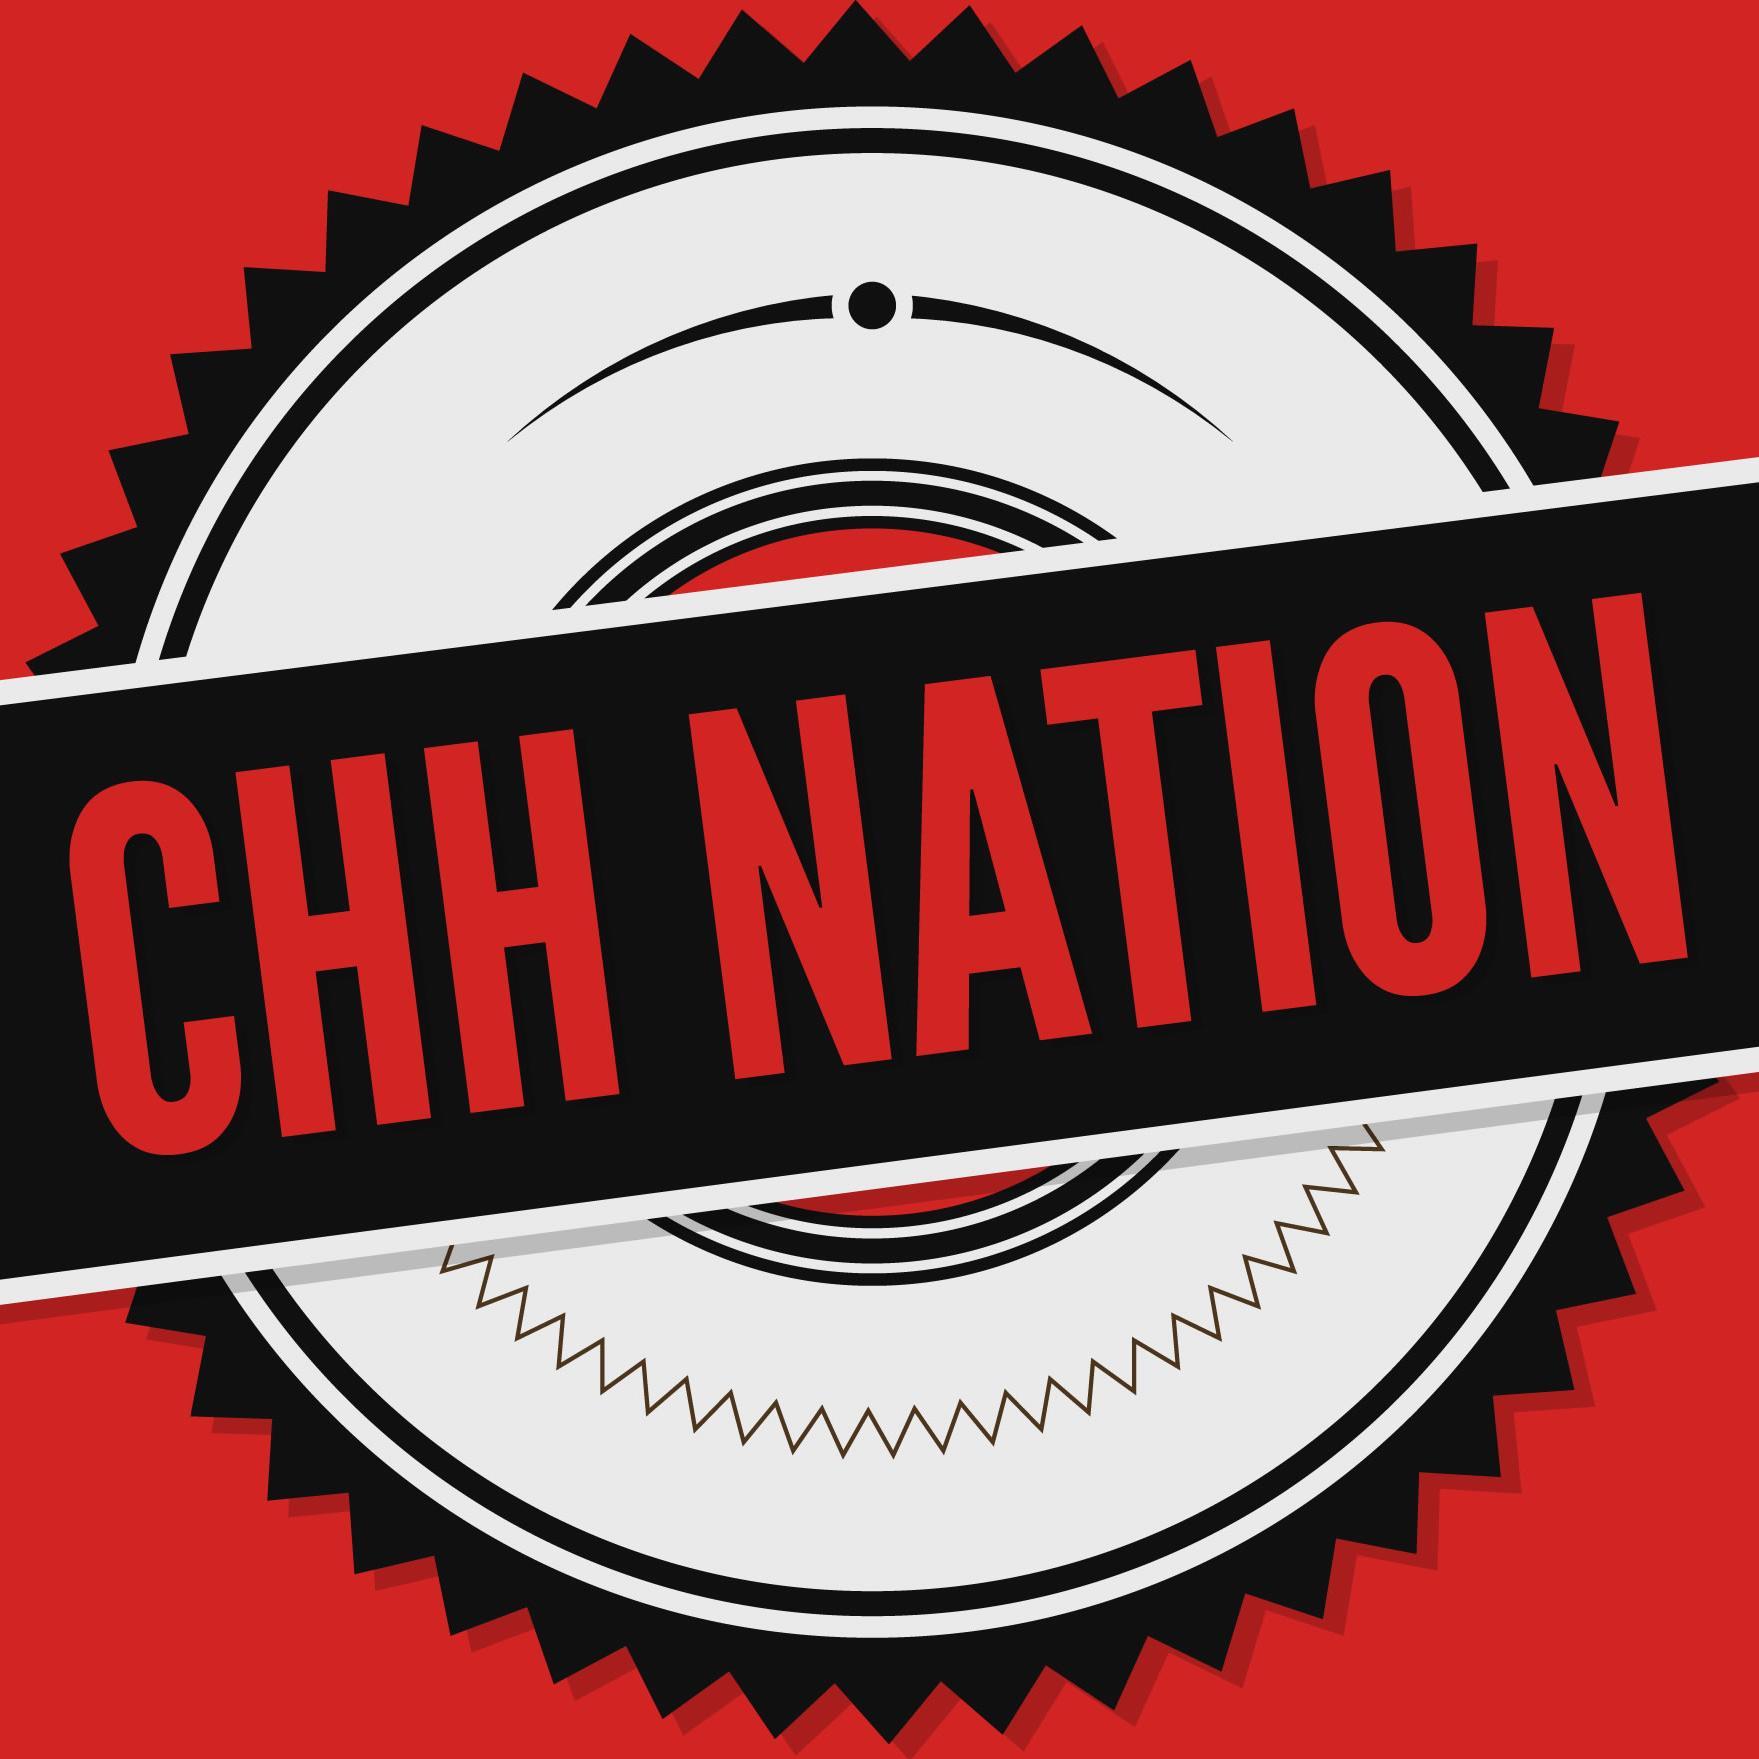 CHH NATION is The New Home Of Christian Hip Hop Media - News - Videos - PICS - Music (Email: chhnation@gmail.com)